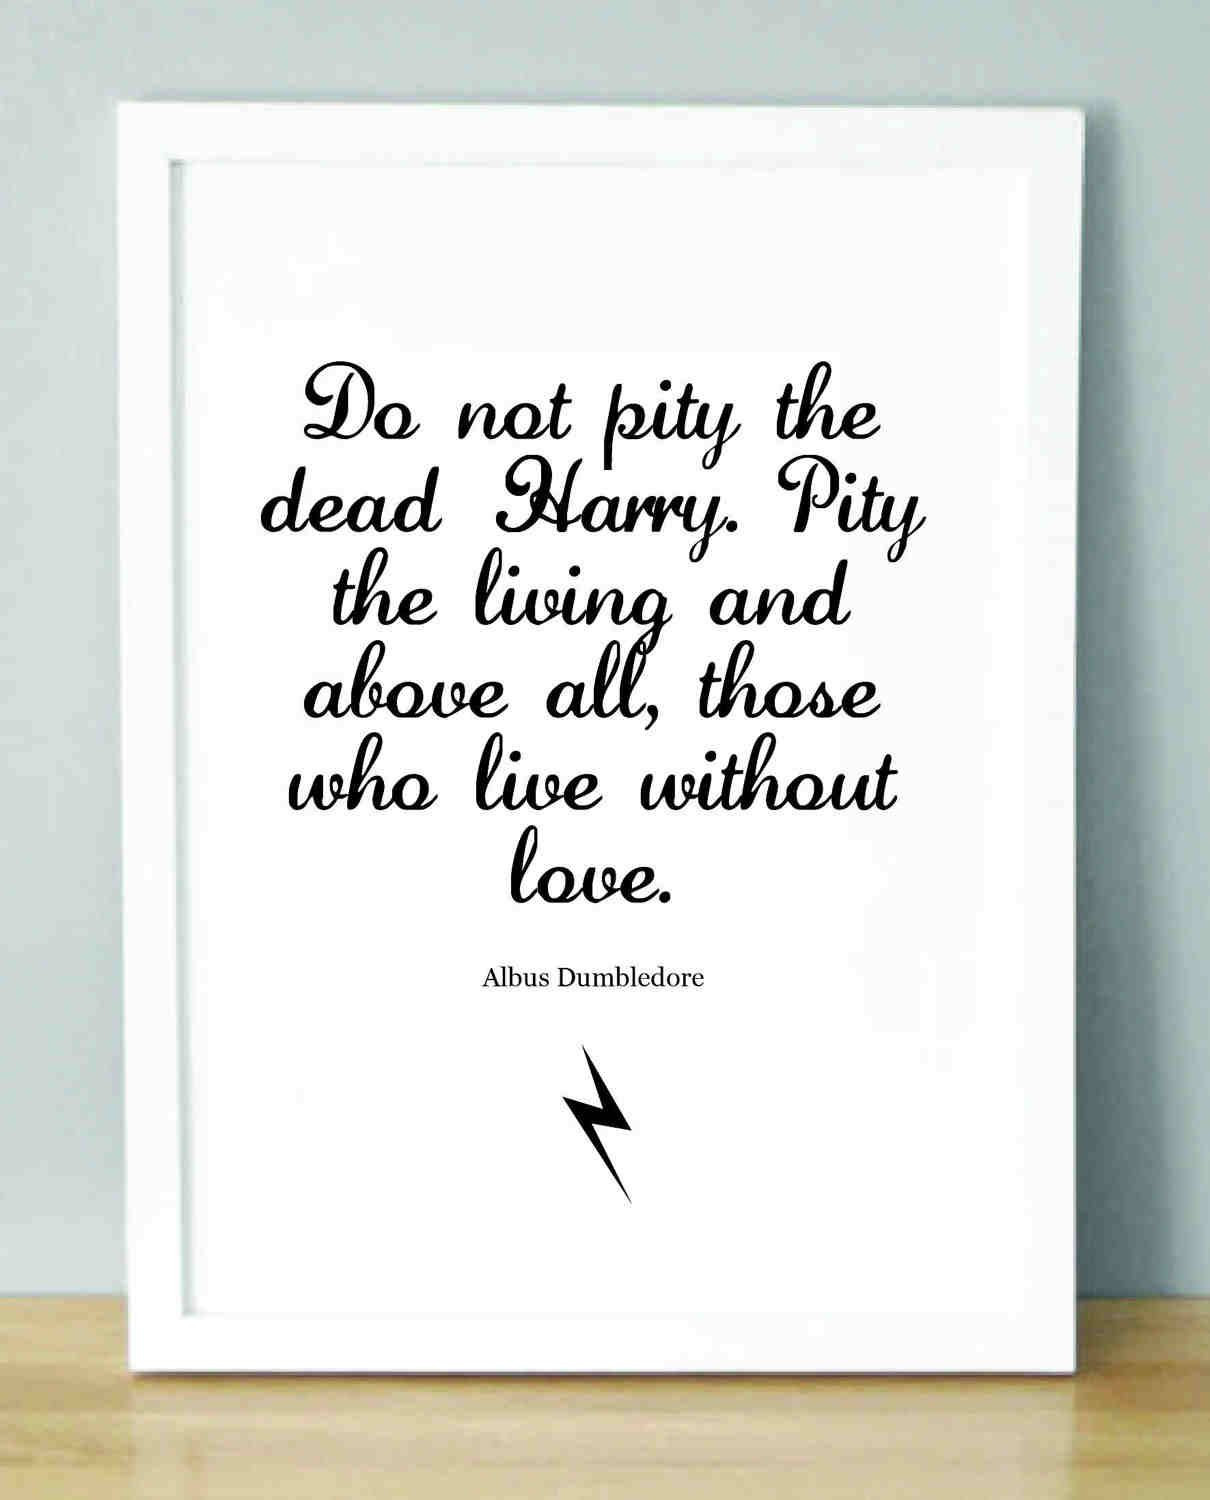 Harry Potter Quotes About Family
 Dumbledore quotes image by Glenn Family Services on